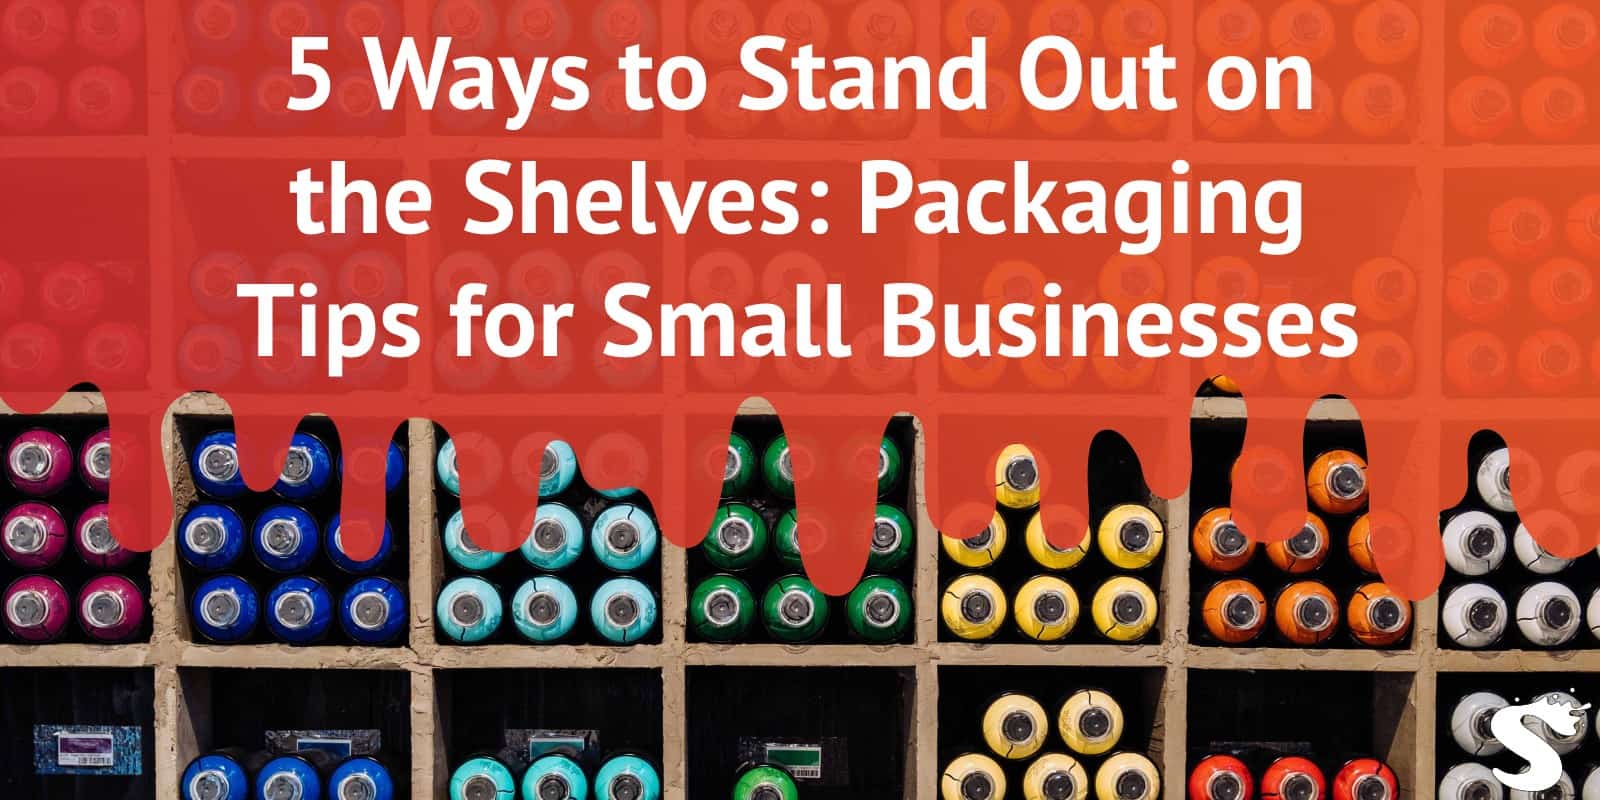 5 Ways to Stand Out on the Shelves: Packaging Tips for Small Businesses